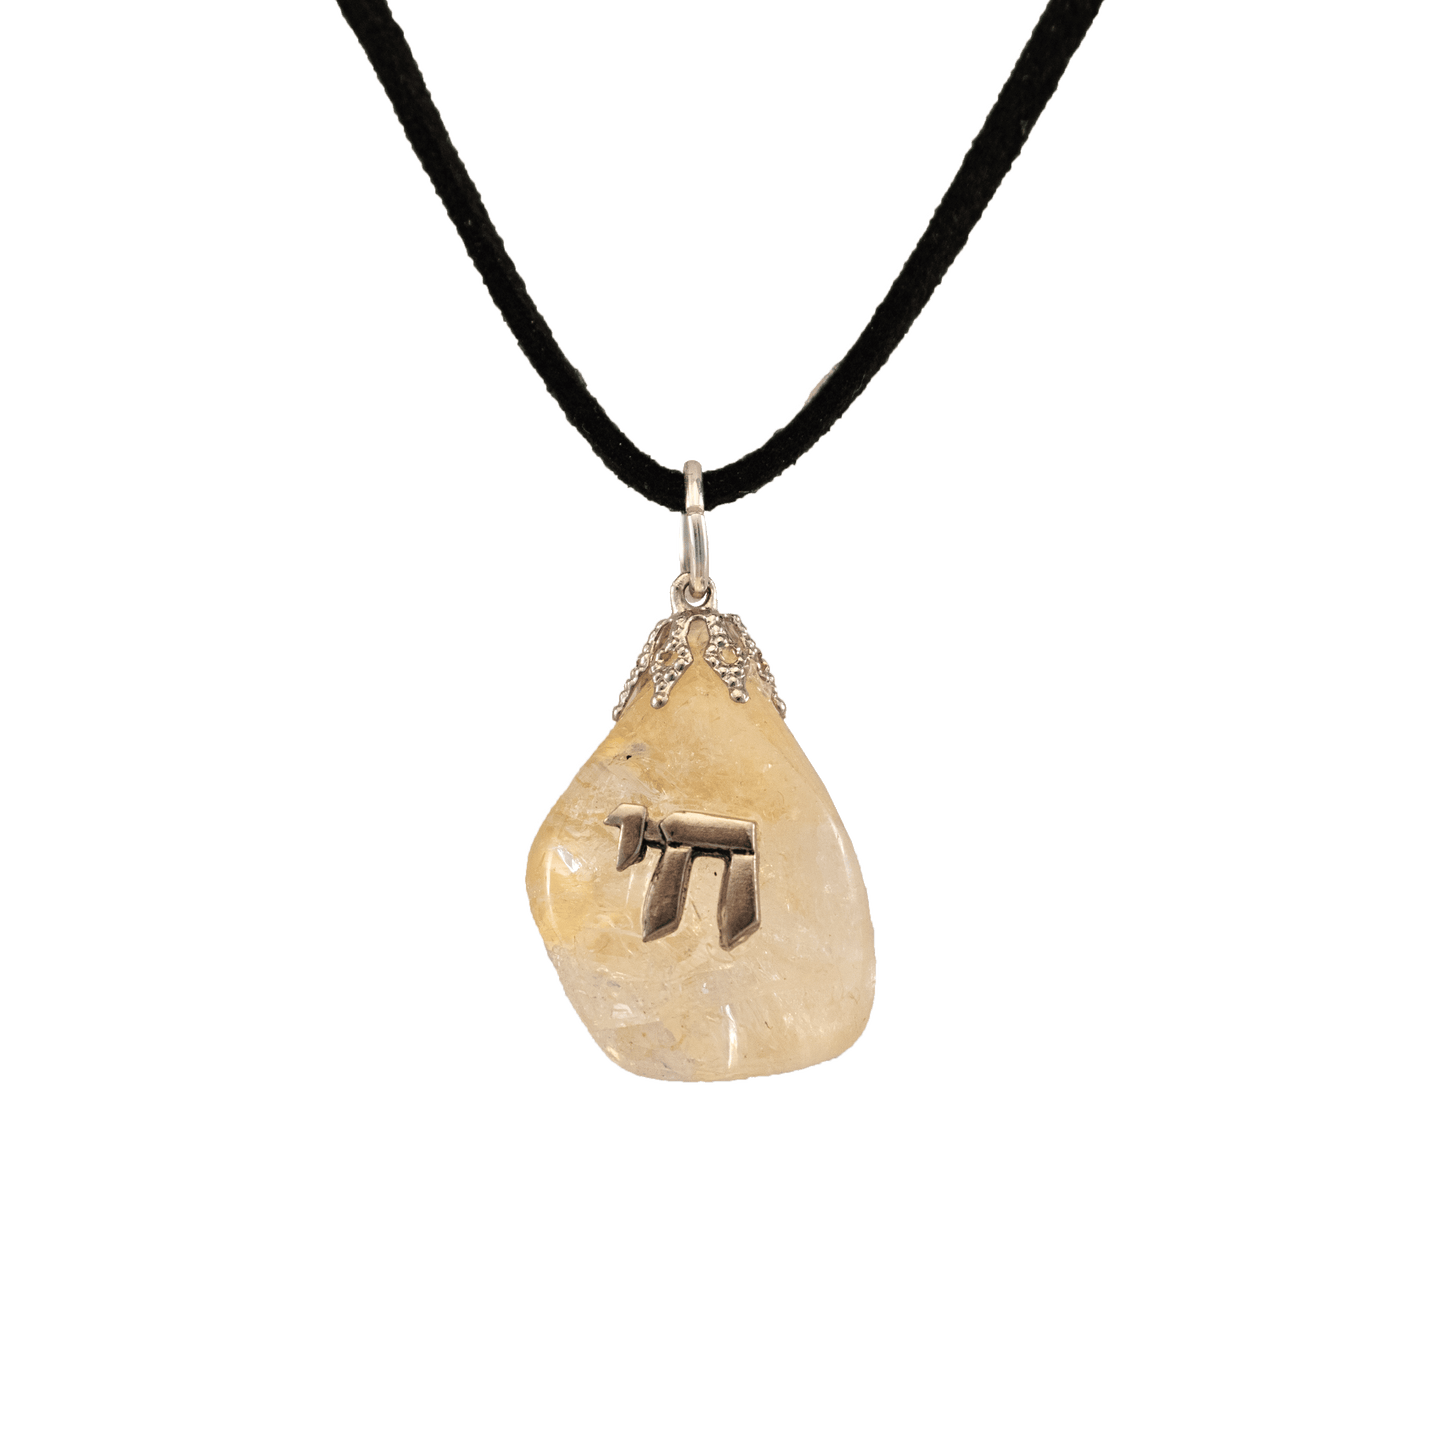 Citrine teardrop stone pendant with Chai symbol in the center on a black cord